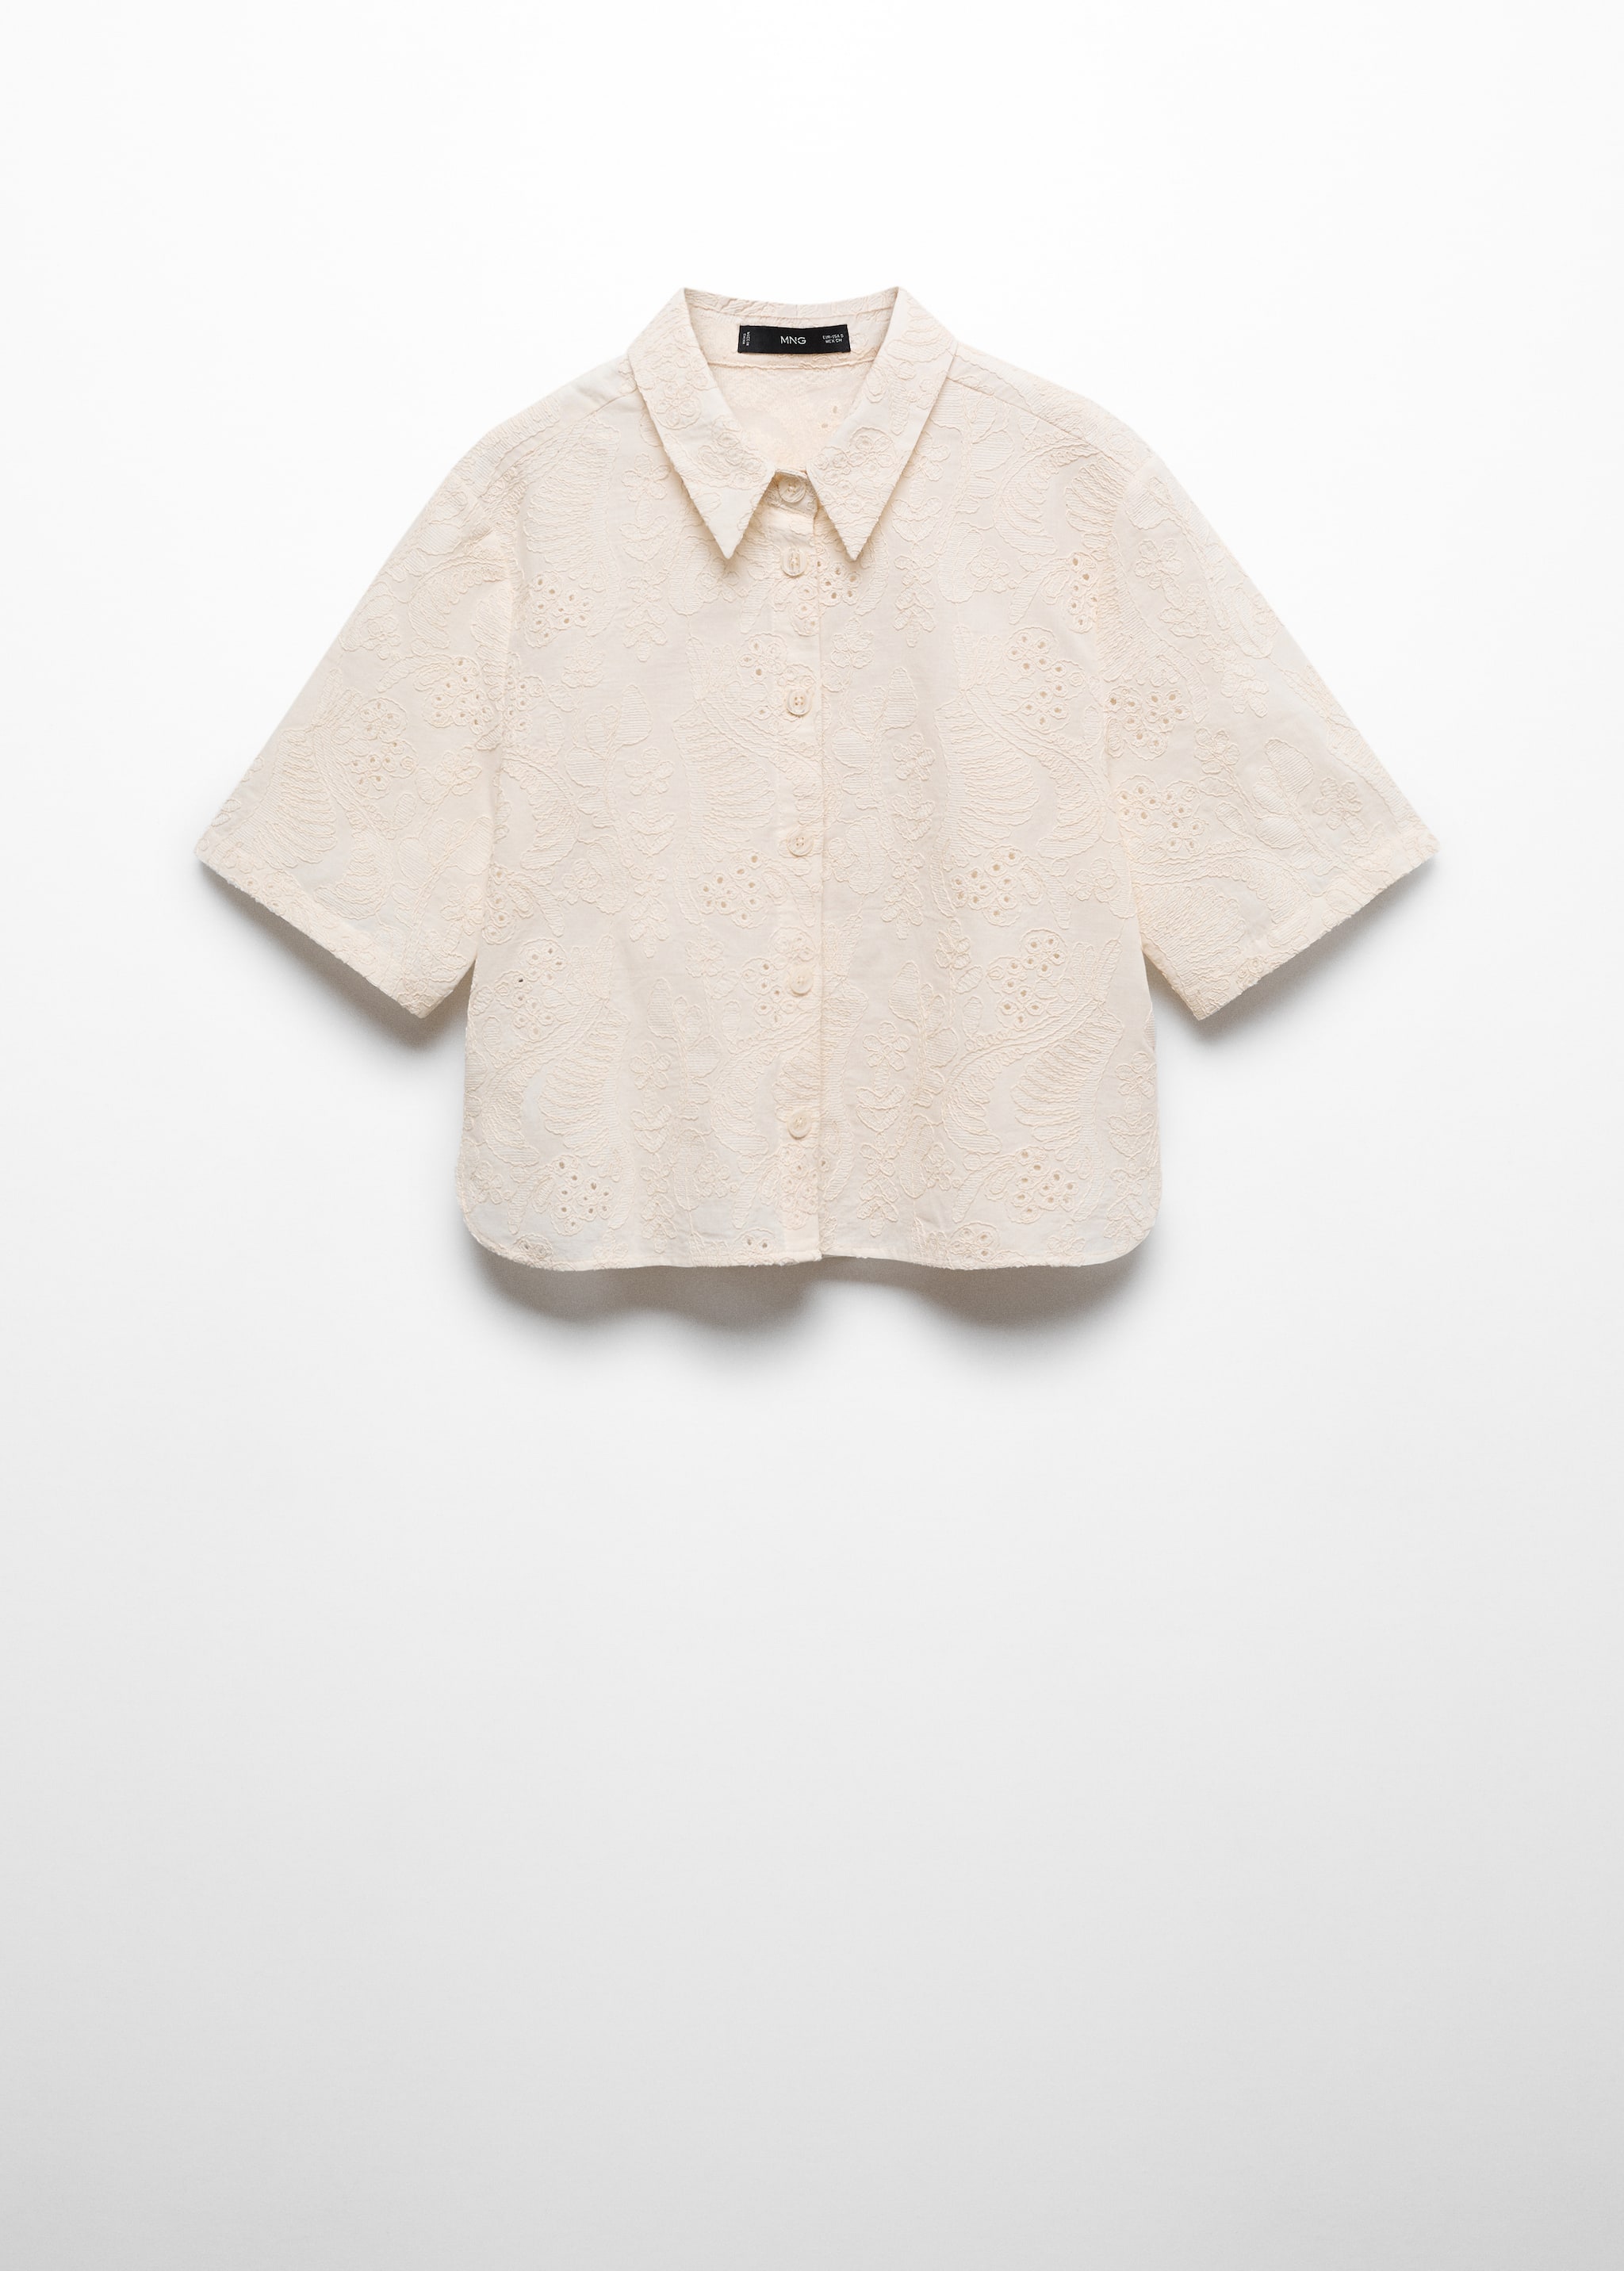 Embroidered detail shirt - Article without model